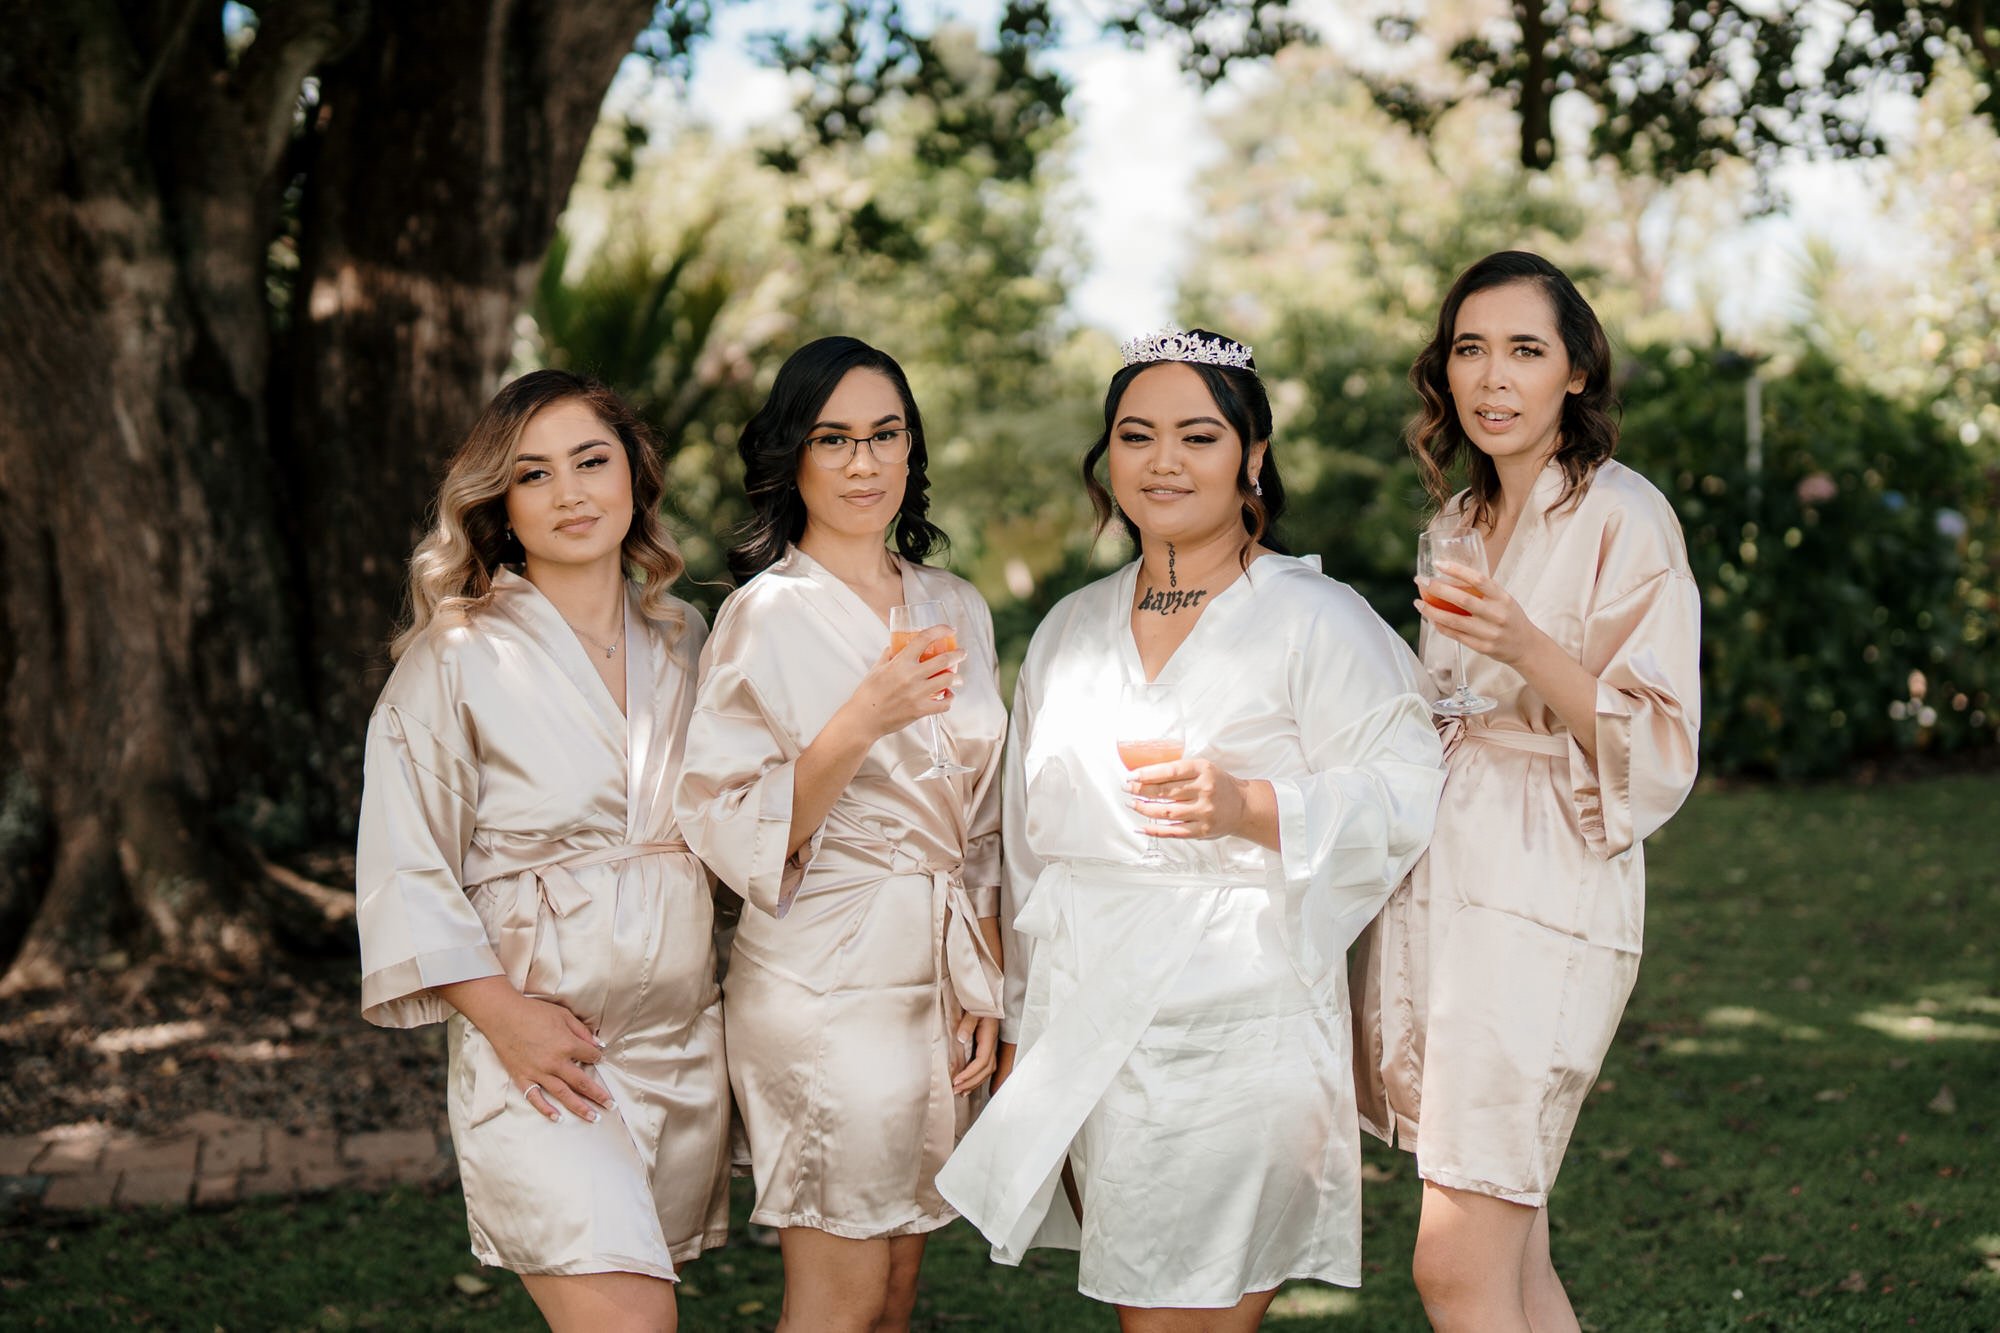 LaValla Estate Wedding | Auckland Wedding Photographer | Top Wedding Venue | best South Auckland venue | top videographer | dear white productions | Auckland photography | Getting Ready